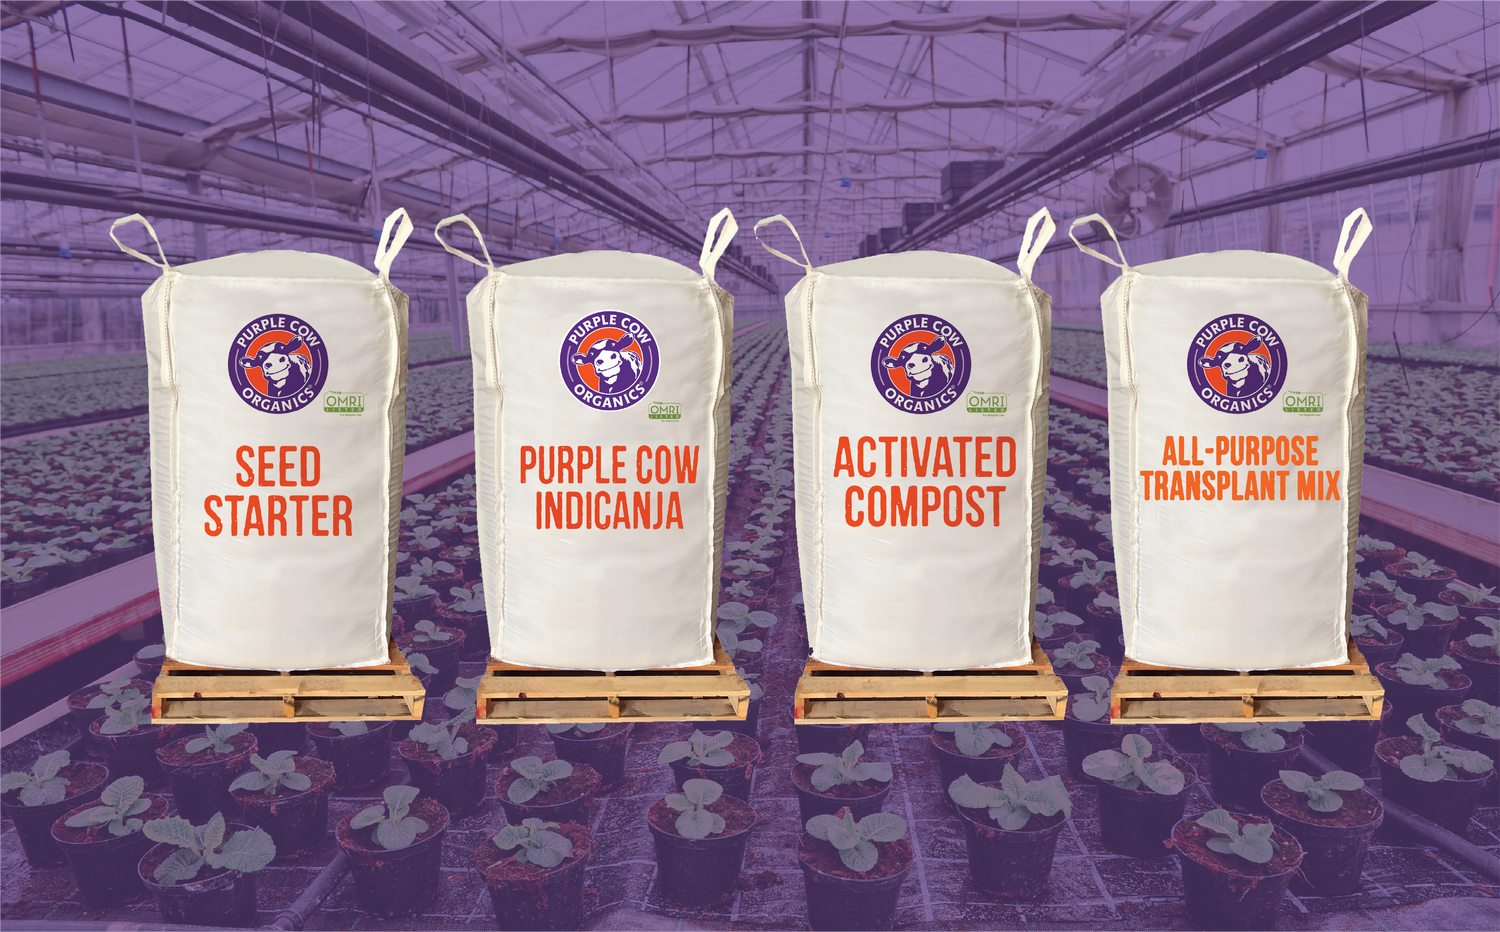 What the Bulk? Our Biggest Sale on Soil is Back!